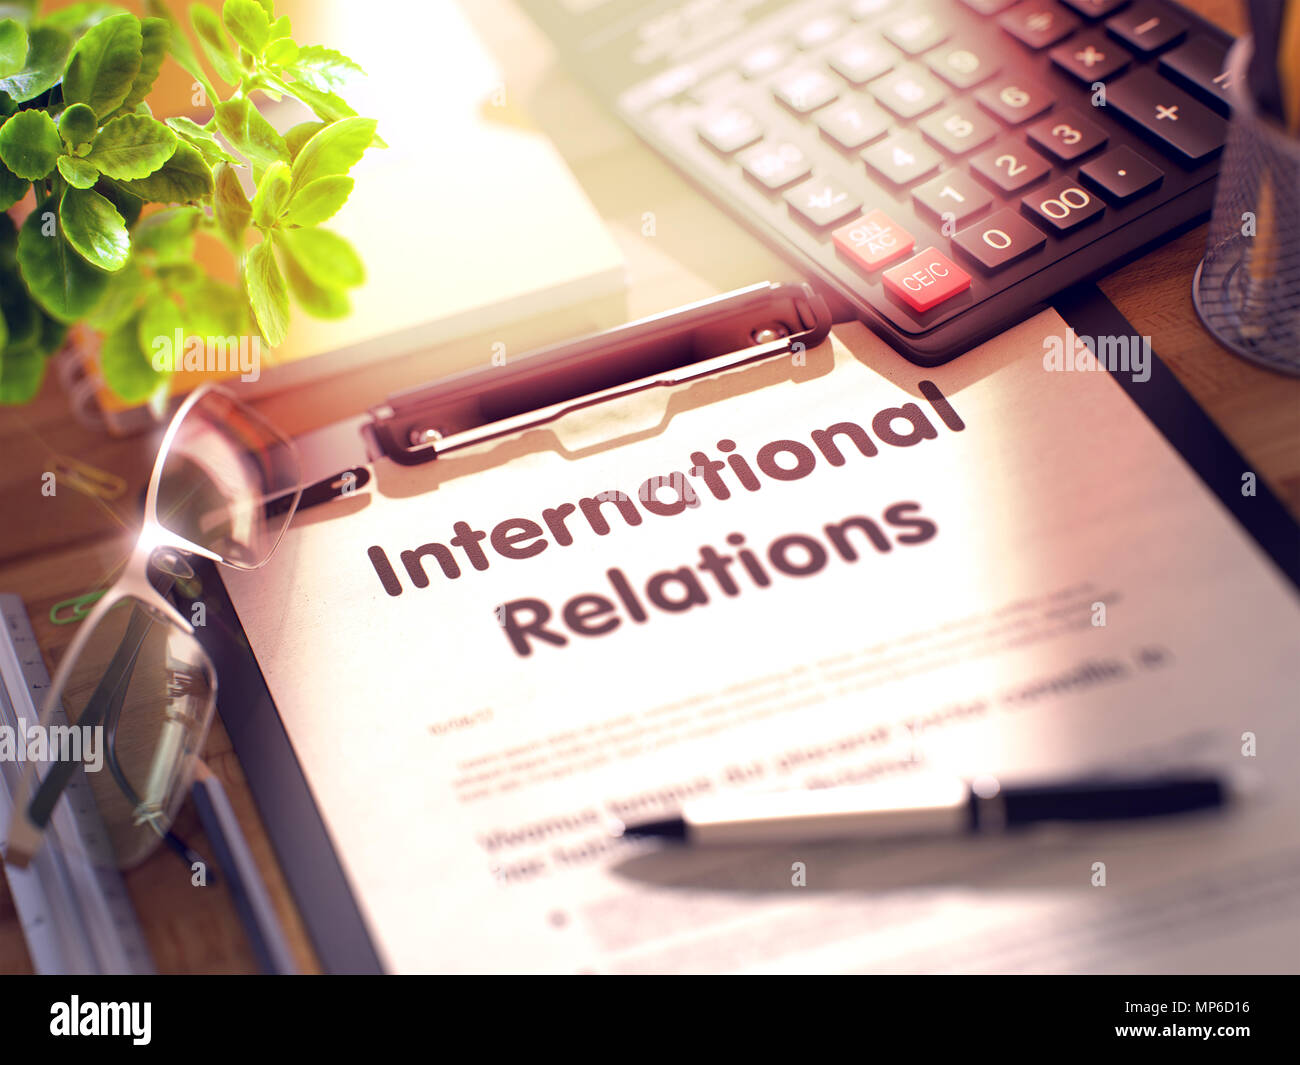 International Relations Concept on Clipboard. Stock Photo